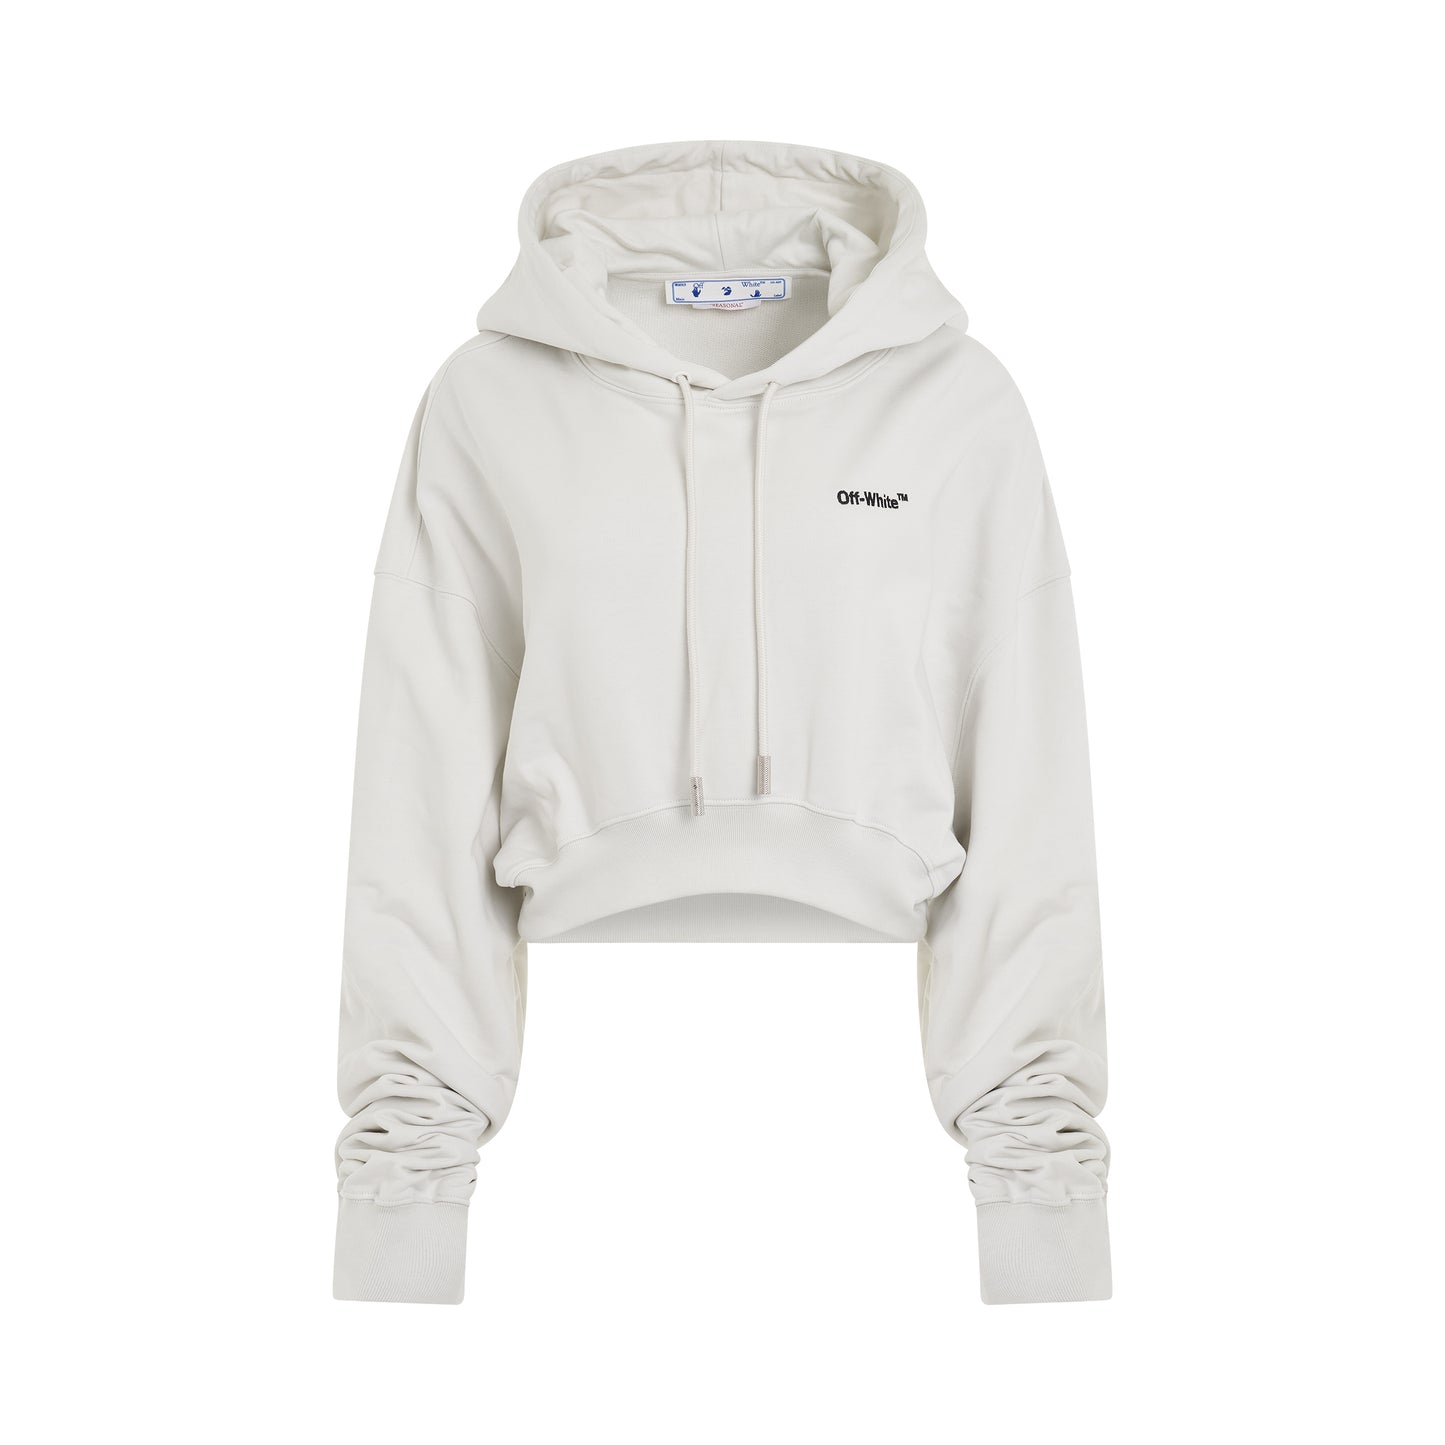 For All Helvetica Crop Oversize Hoodie in White/Black